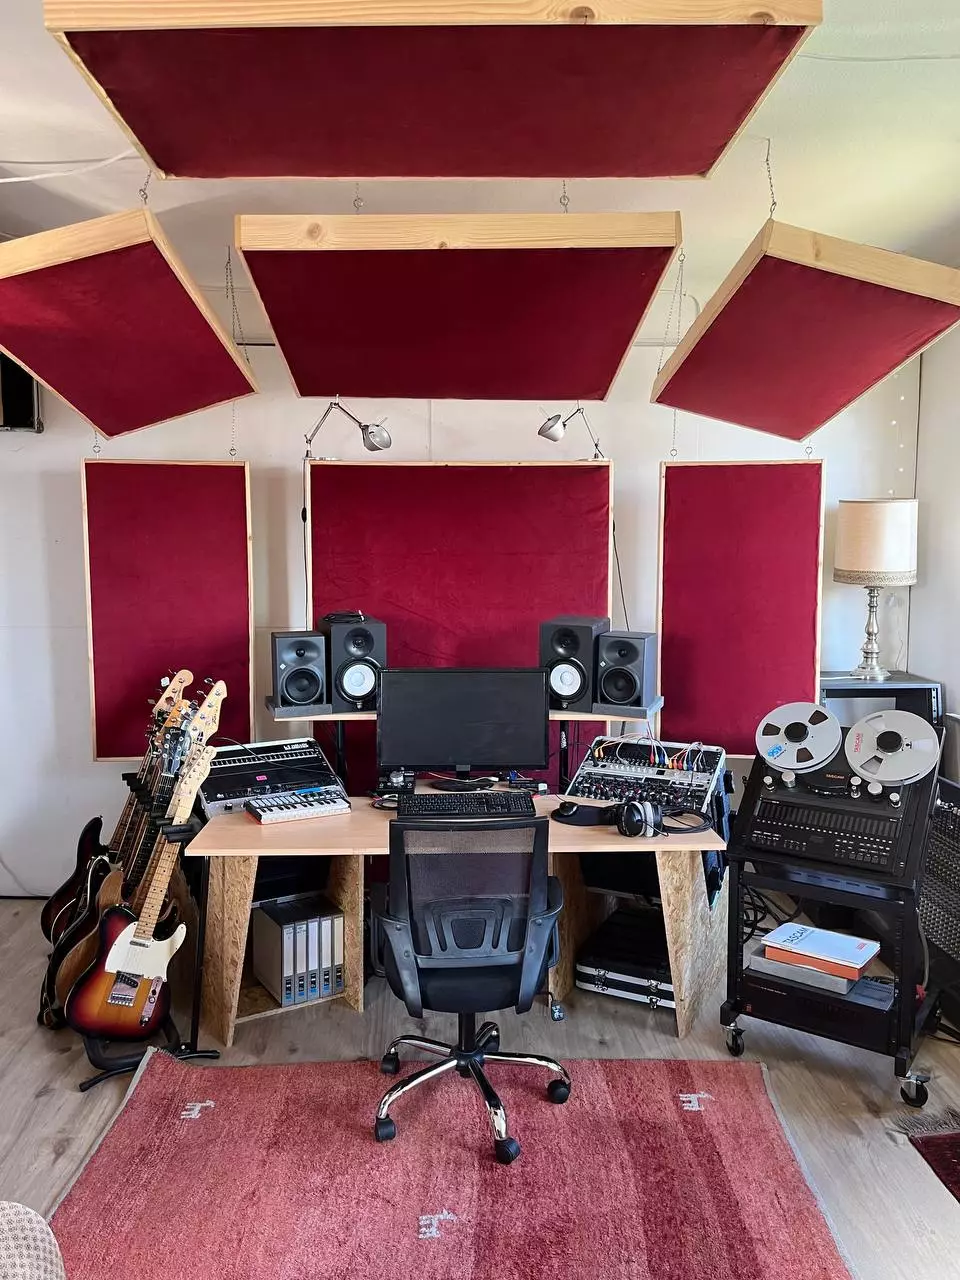 Another View of the Studio